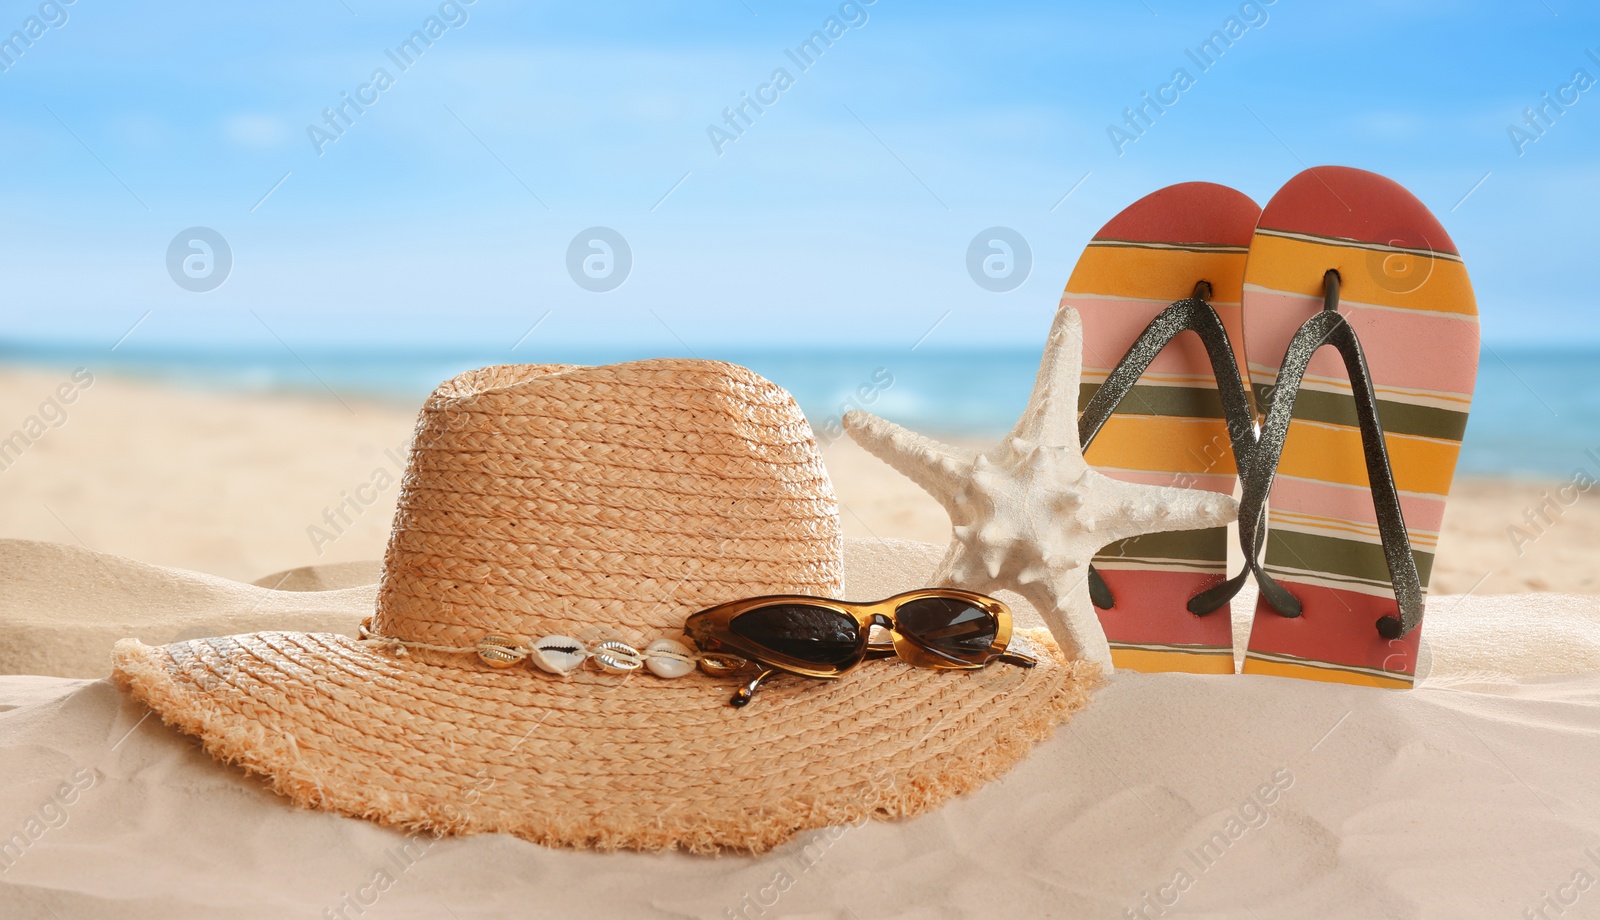 Image of Different beach accessories on sand near ocean